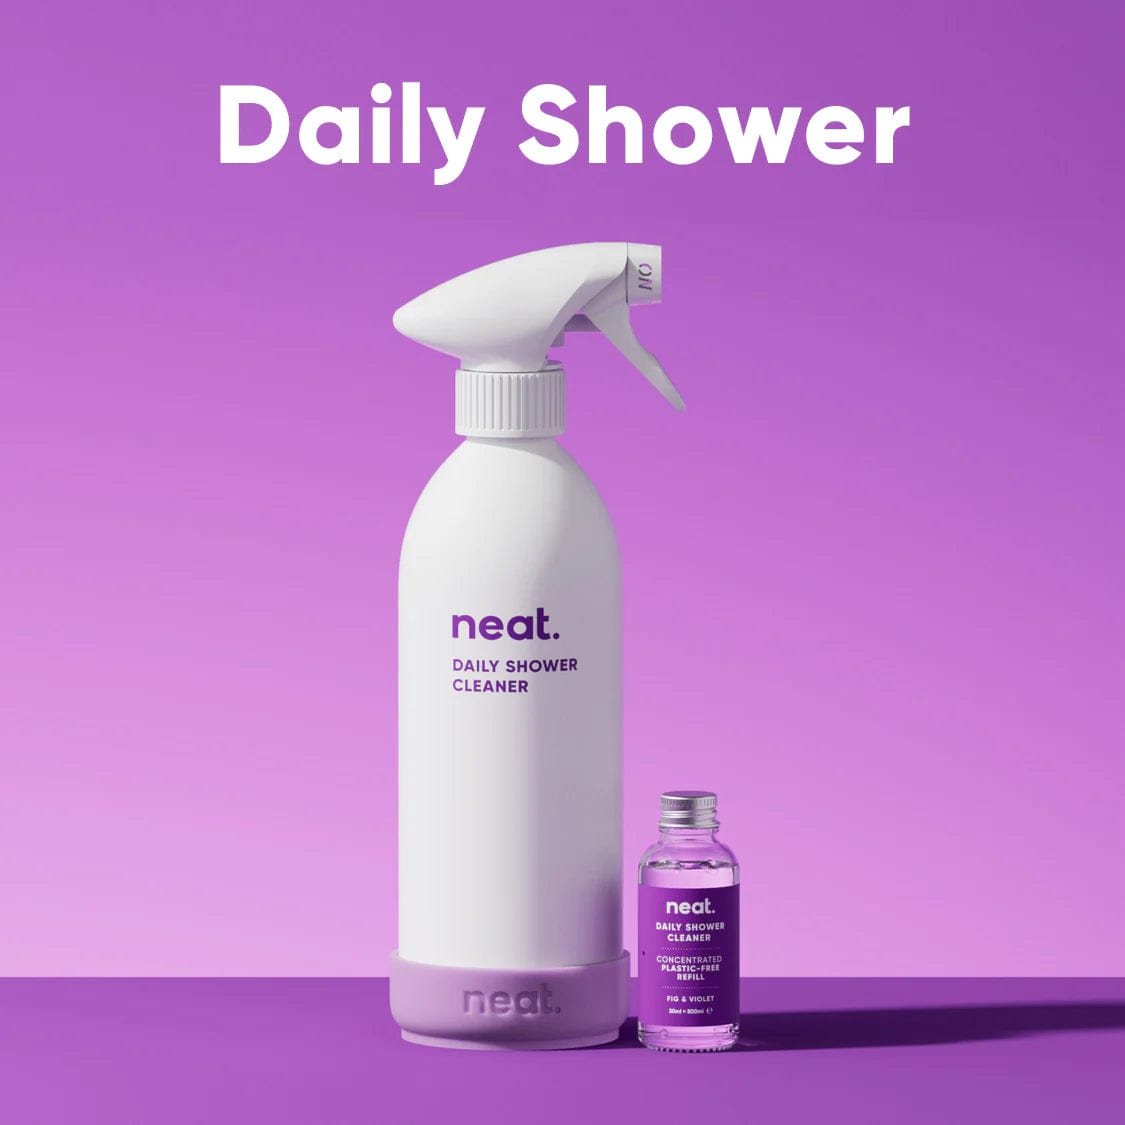 neat. Household Cleaning Products Neat Daily Shower Cleaner Refill Concentrate - Violet & Fig